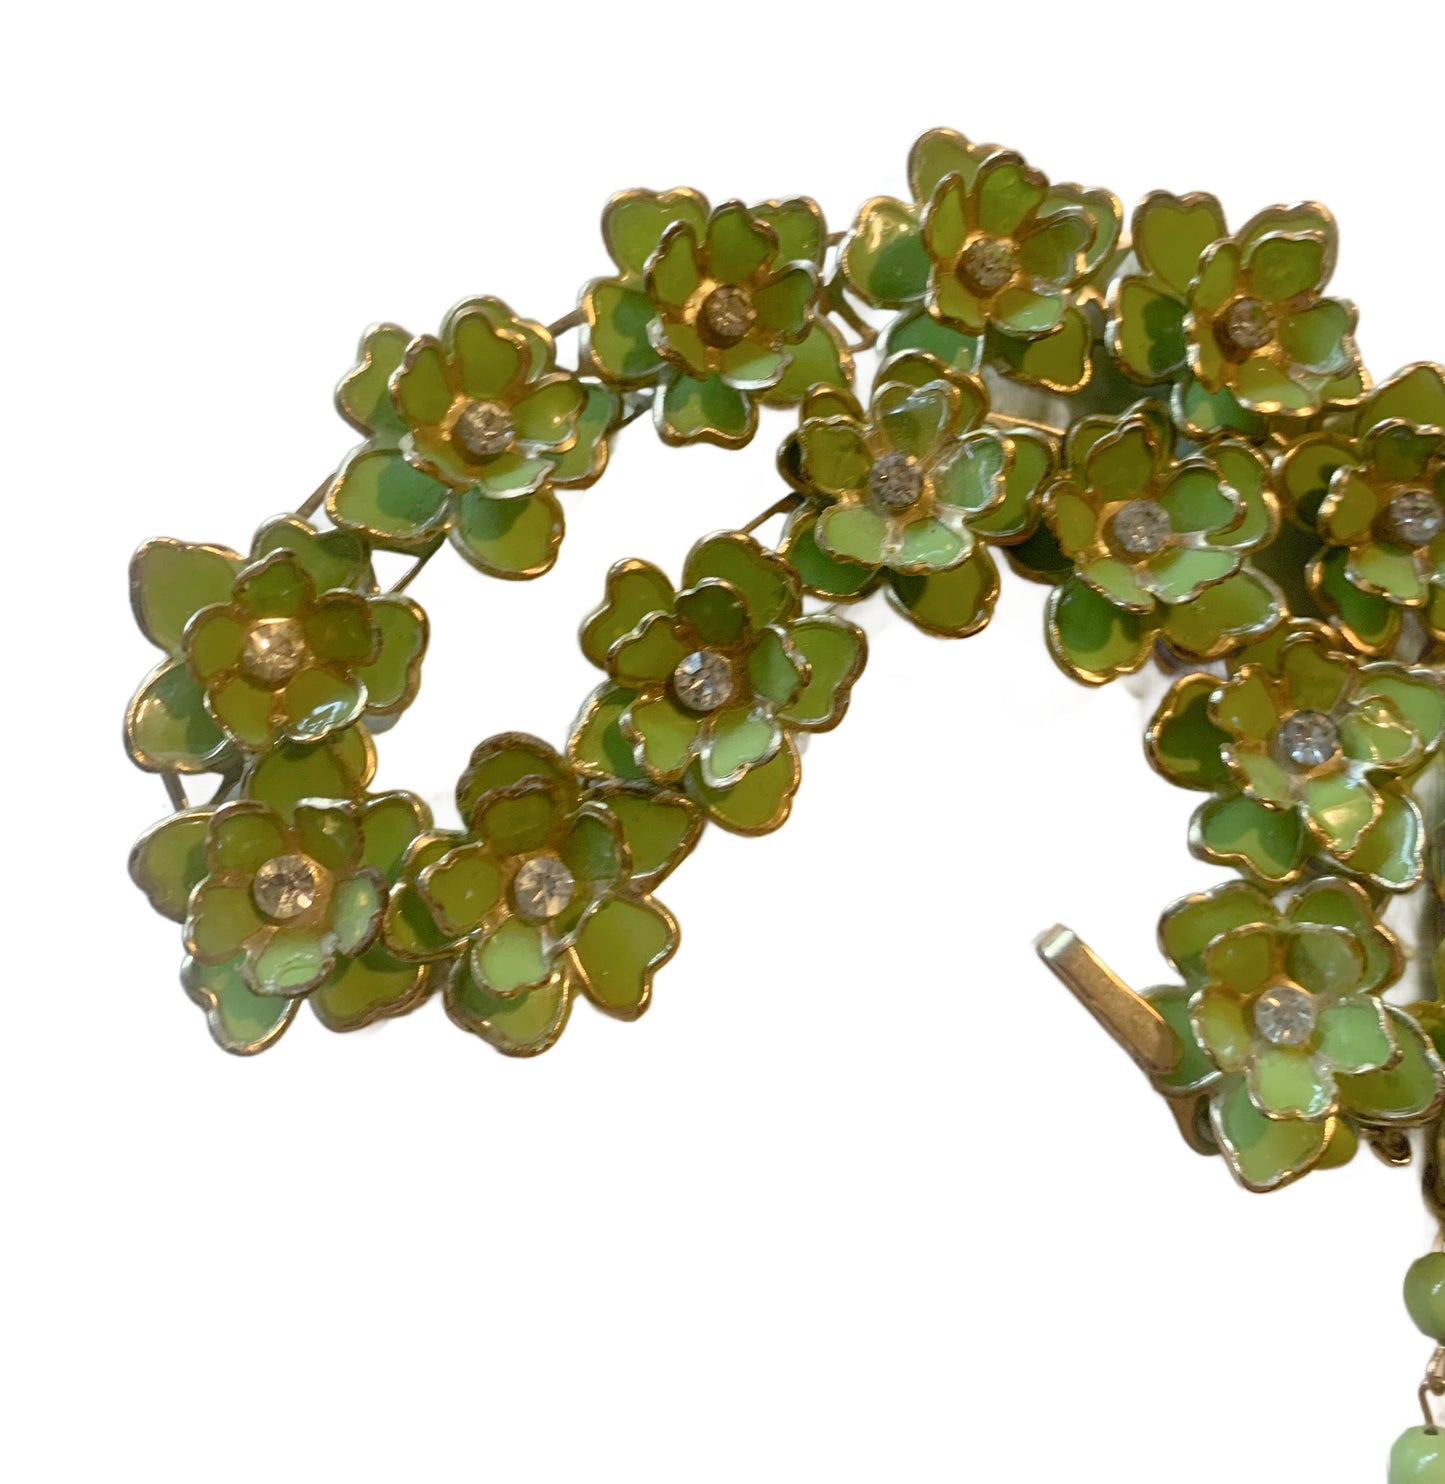 Chartreuse Green Celluloid Flowers Necklace with Rhinestones circa 1930s